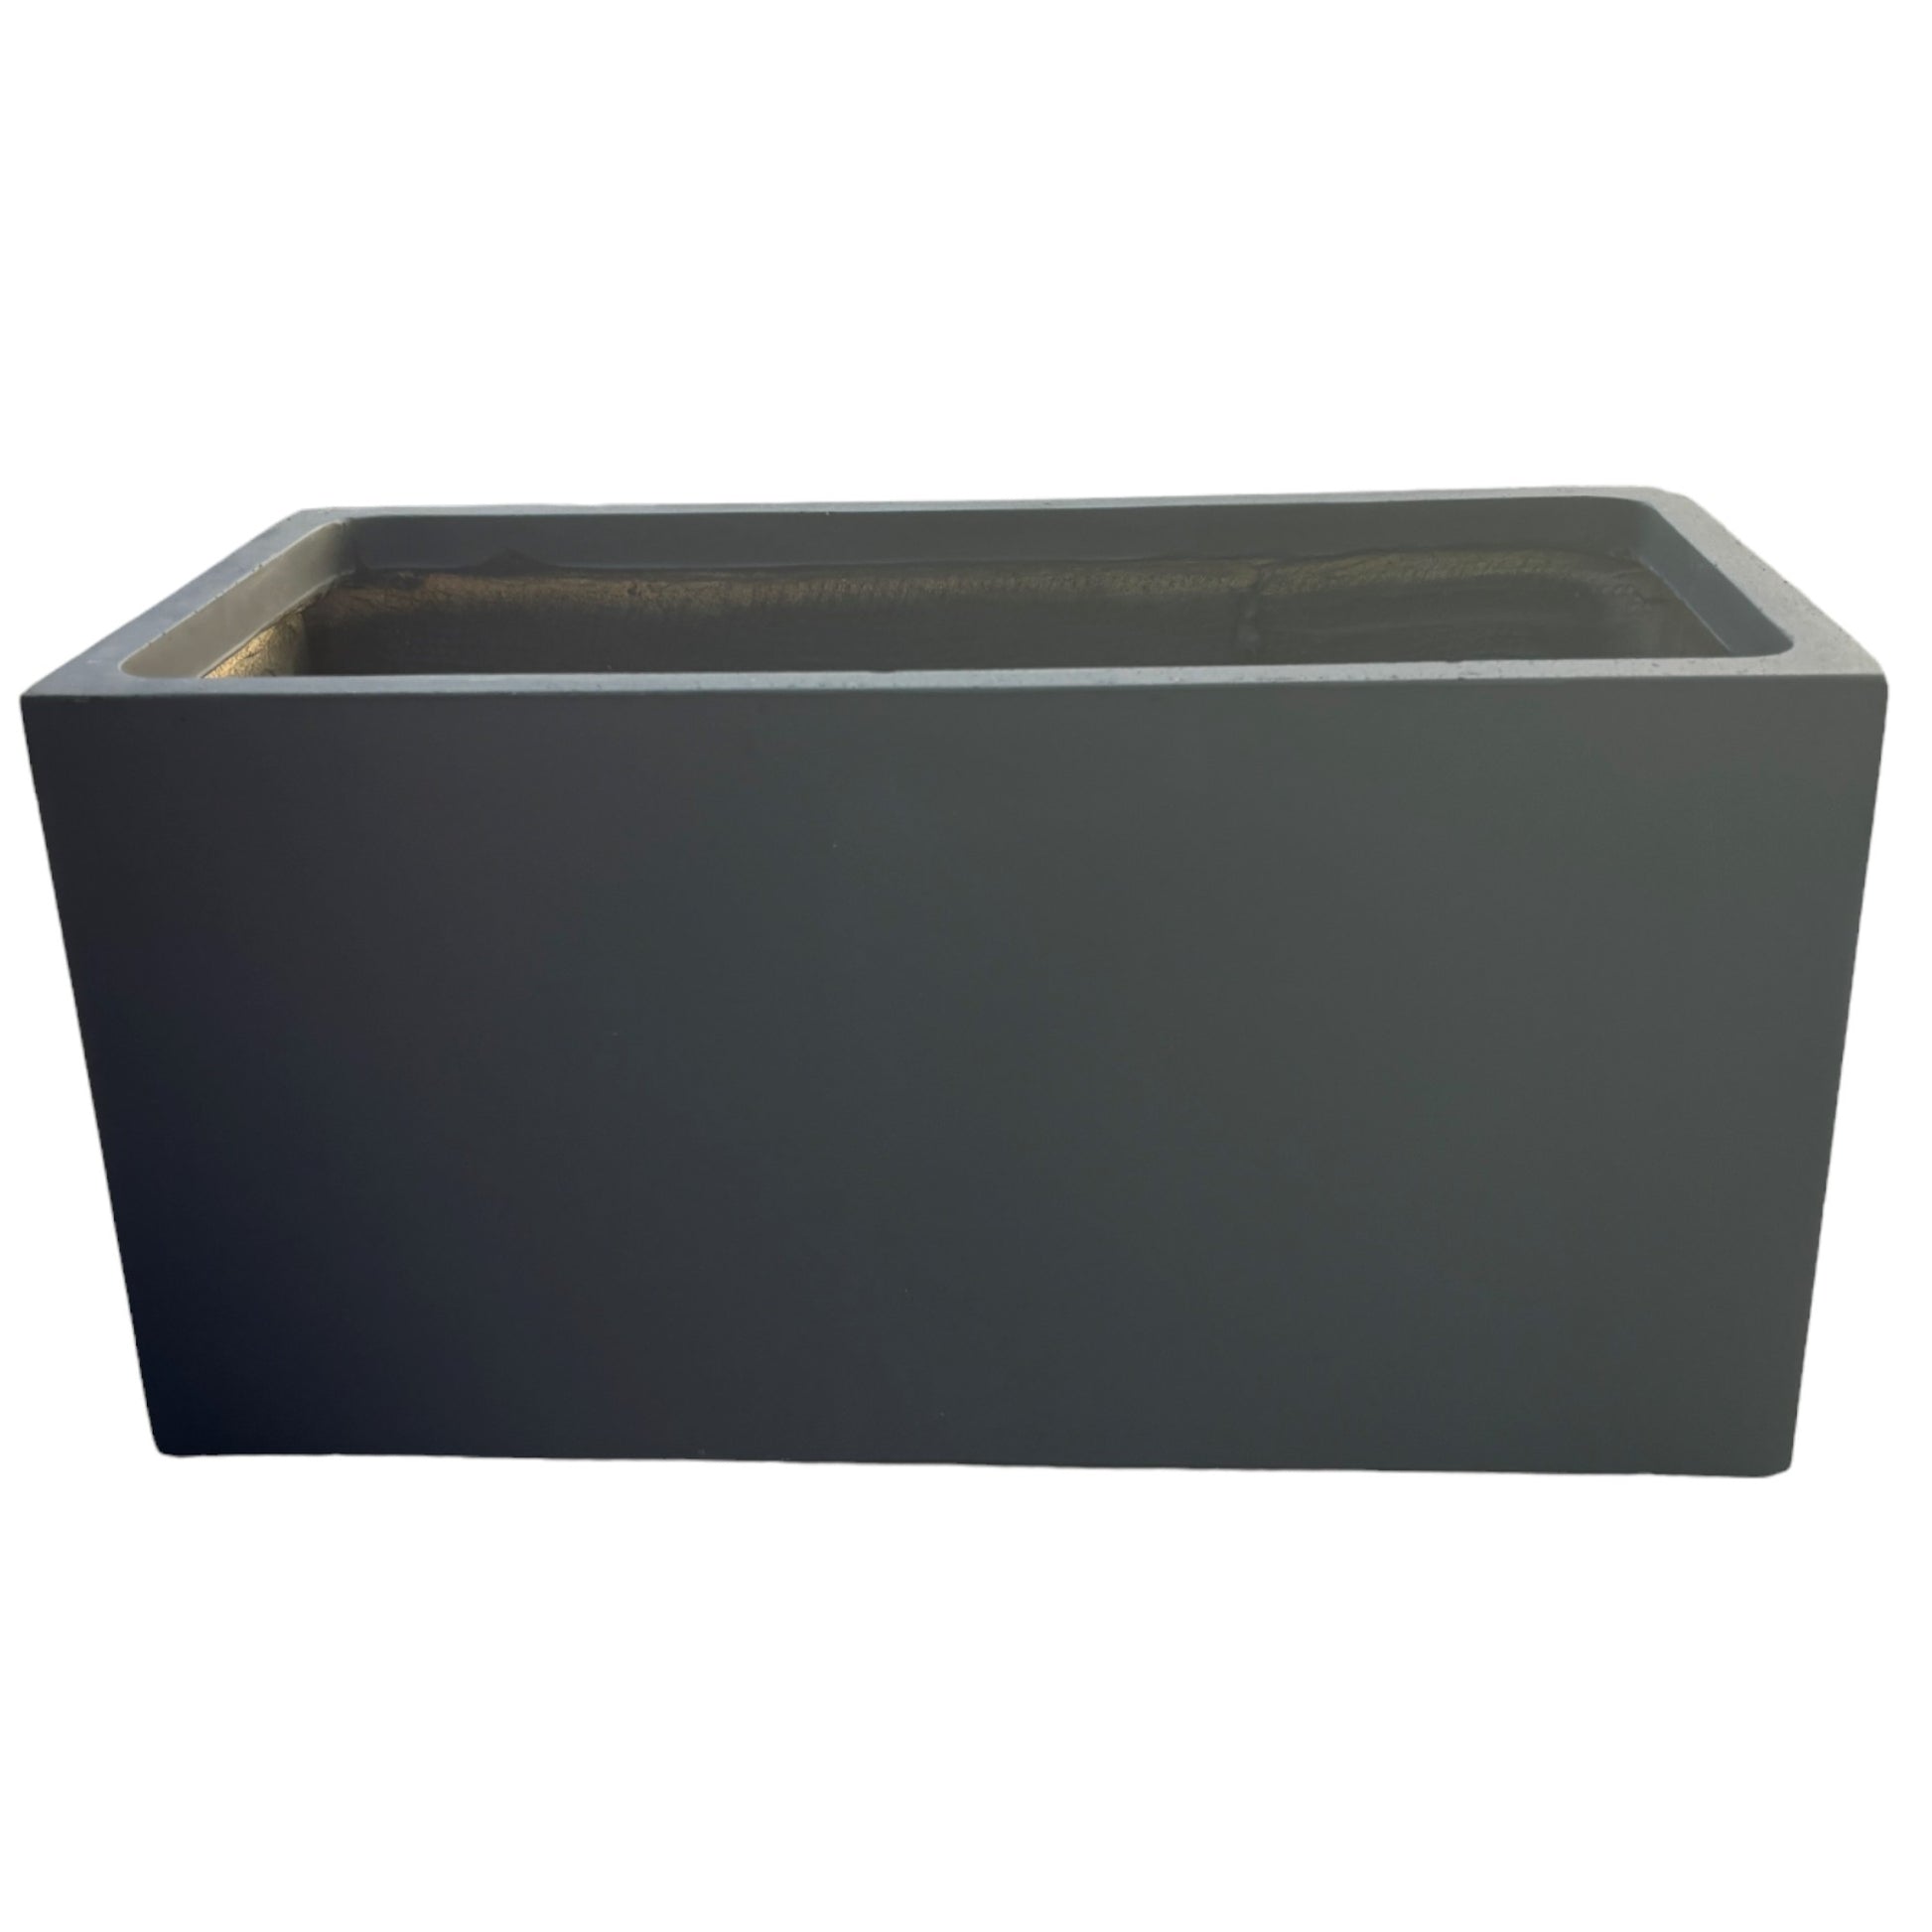 UrbanLITE Asher Trough - Lead - Landscaping ideas - Available at iPave Natural Stone